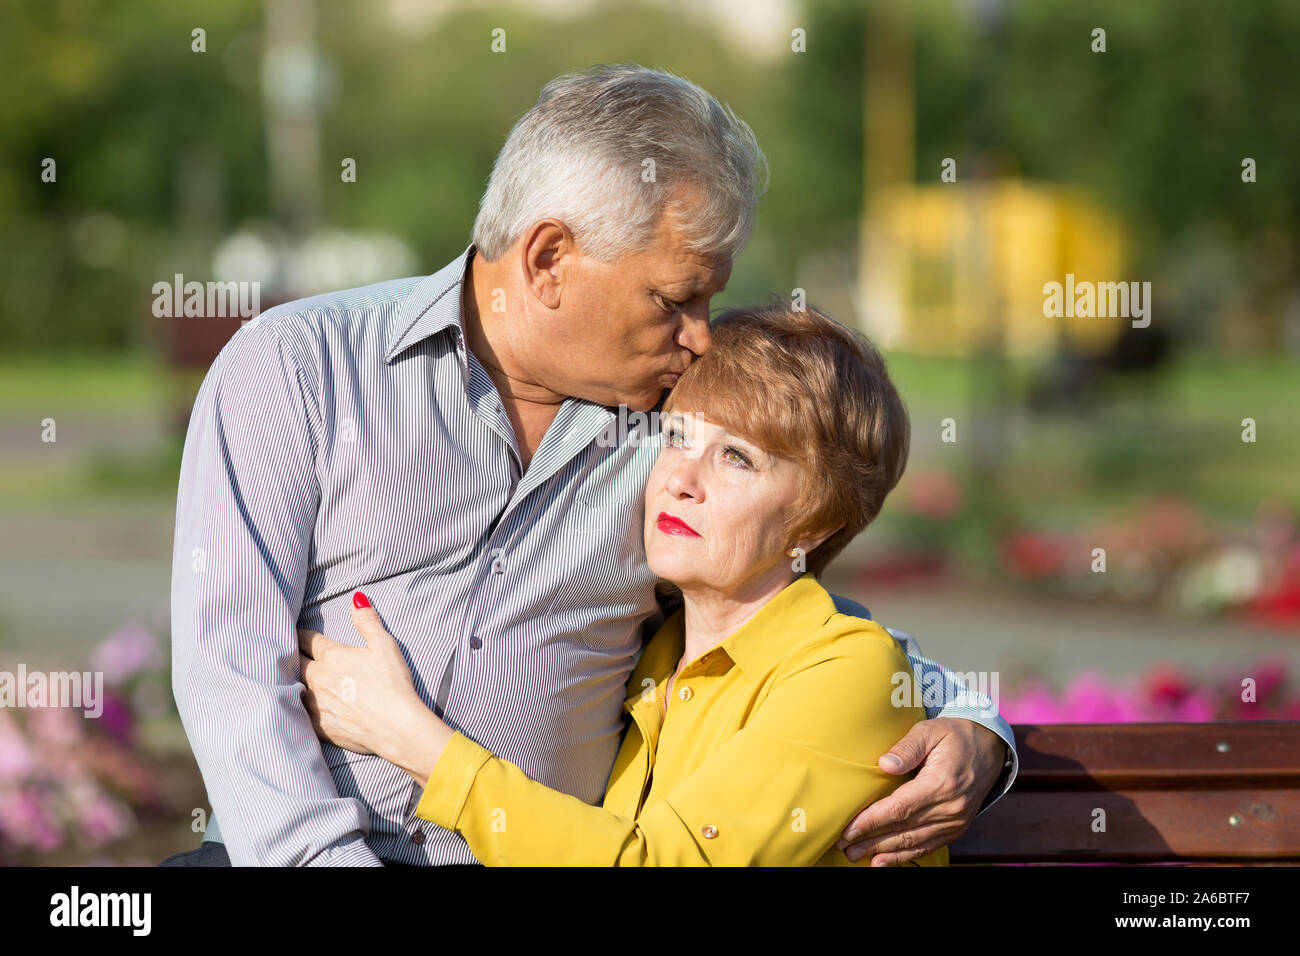 Man and woman aged on first date, Stock Photo